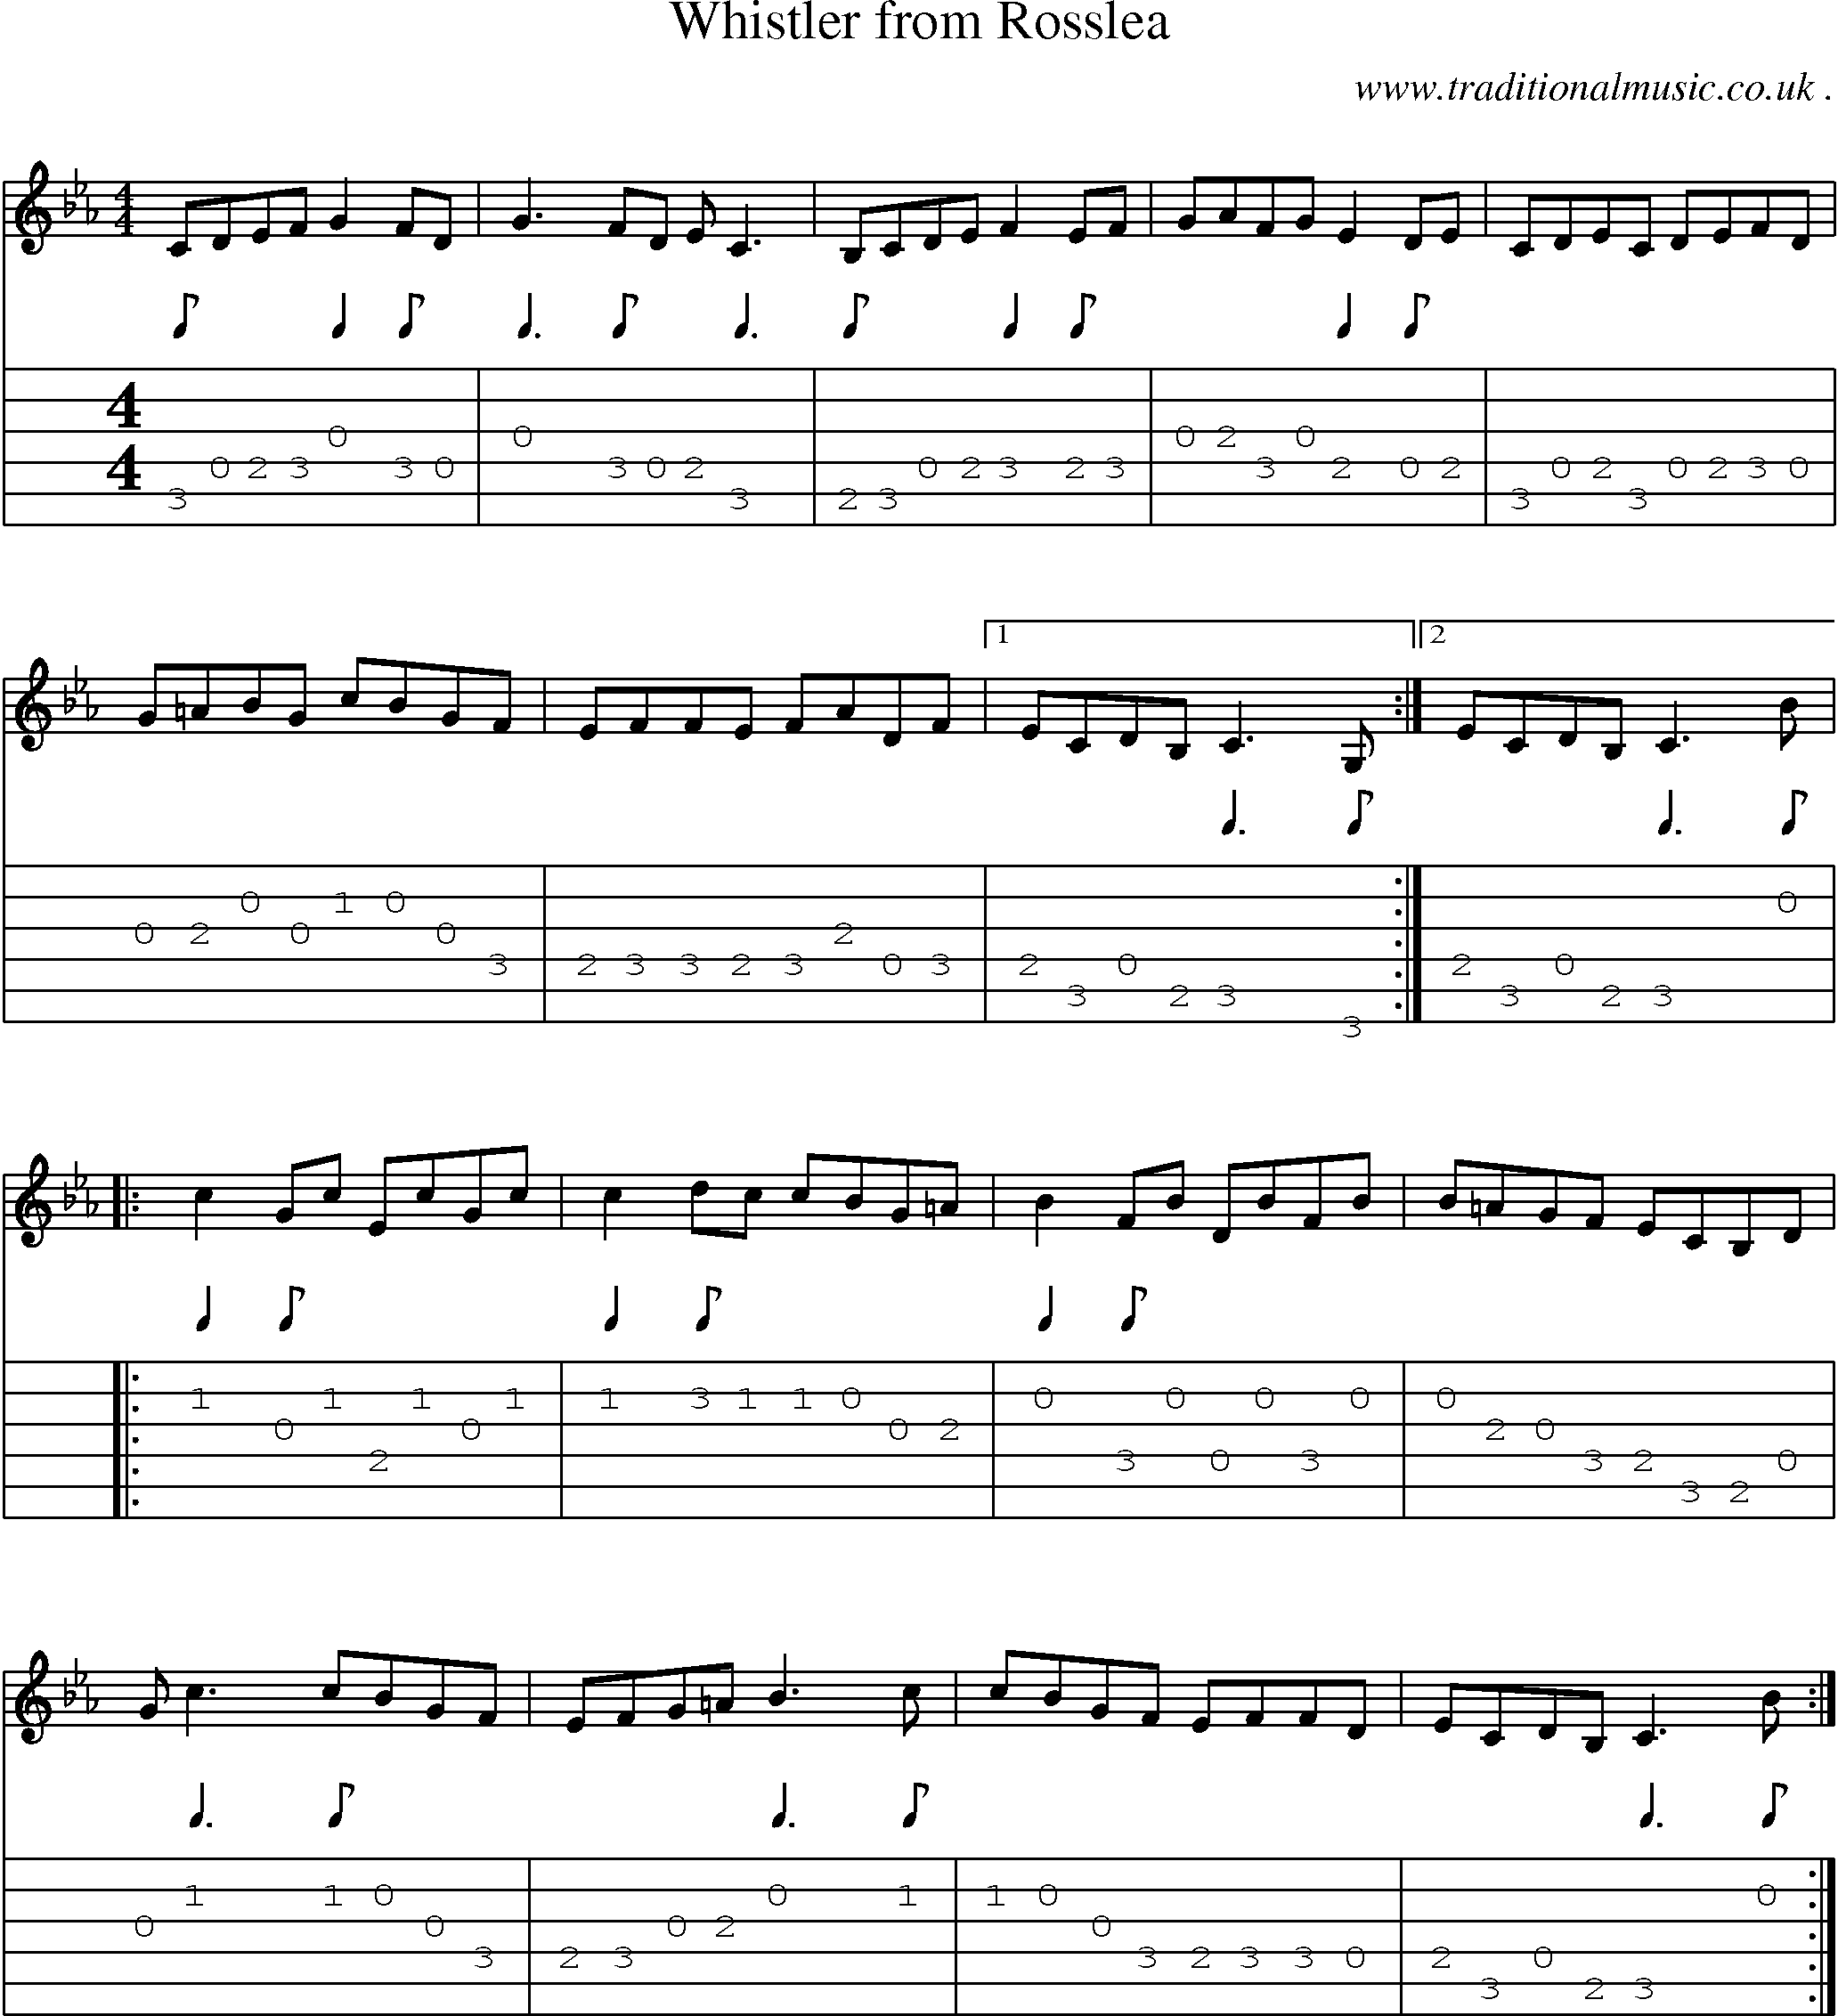 Sheet-Music and Guitar Tabs for Whistler From Rosslea